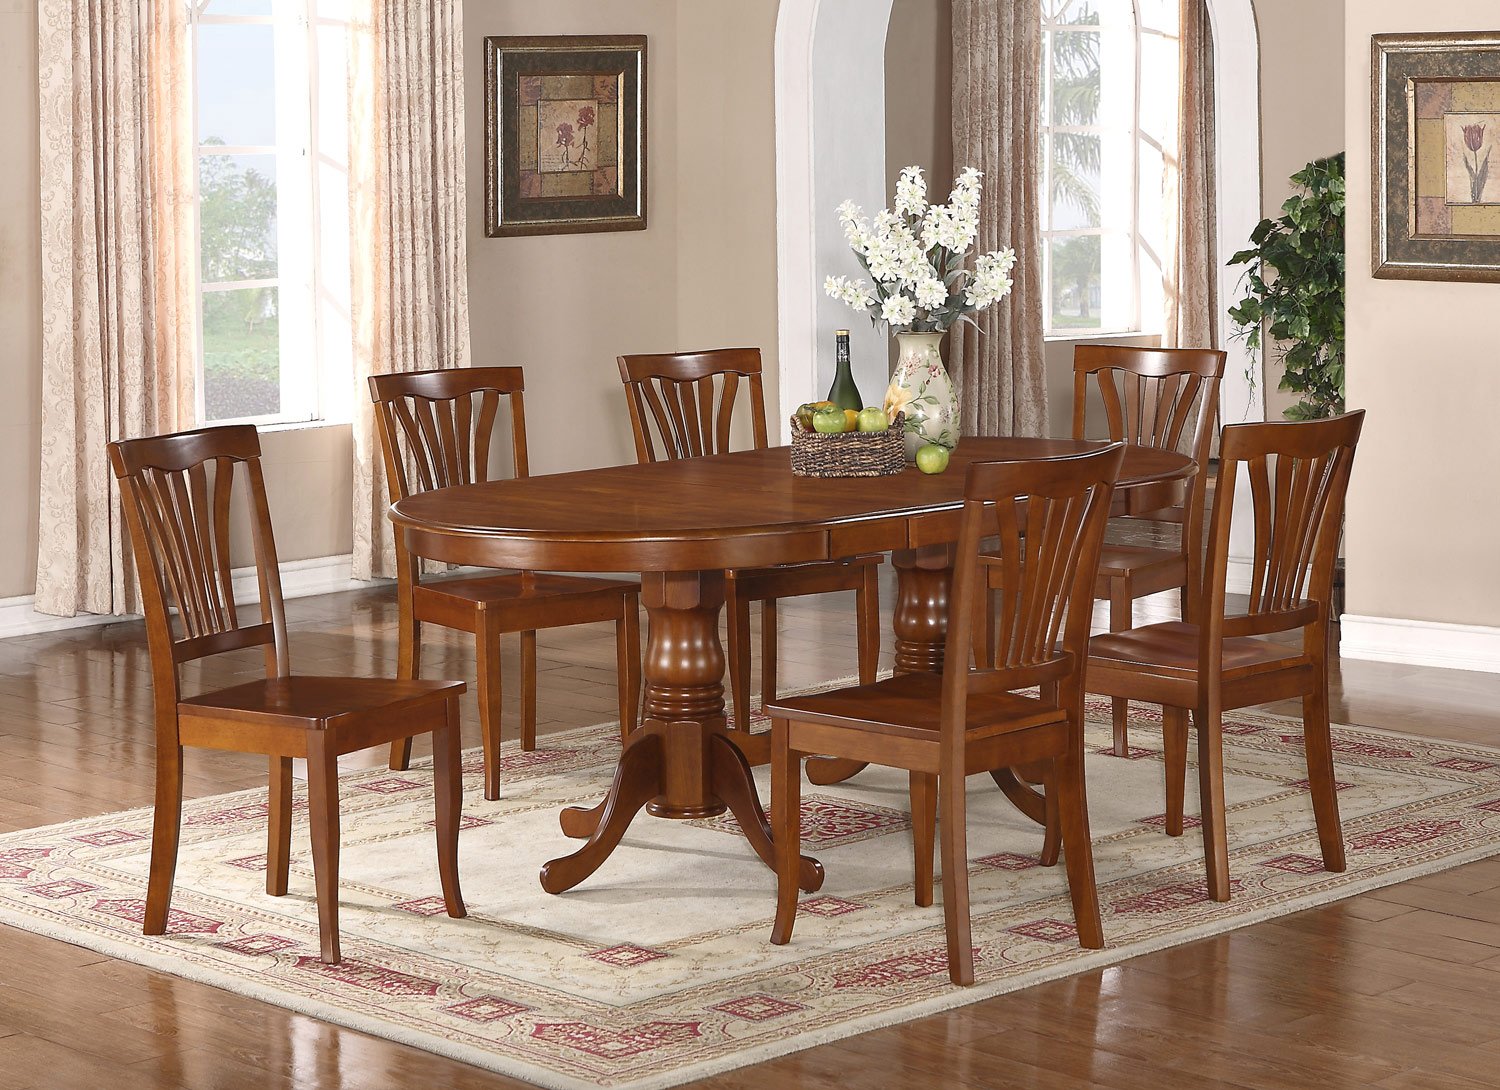 8 chair dining room table sets